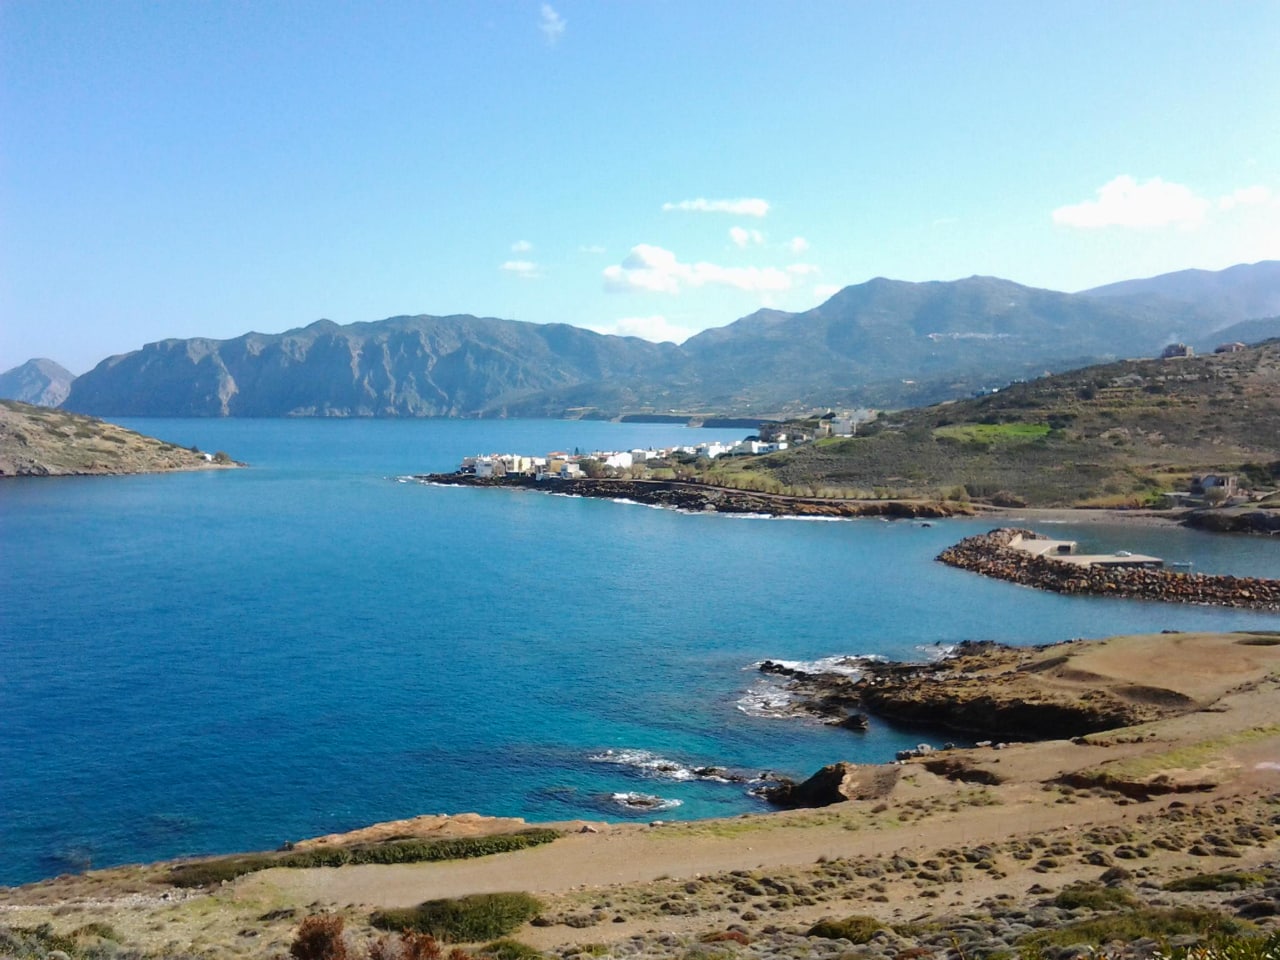 mochlos travel guide, mohlos travel guide, mochlos where to stay, mochlos villas apartments, mohlos ancient site, mohlos history, mochlos activities, things to do mochlos, crete travel mochlos, the crete you are looking for